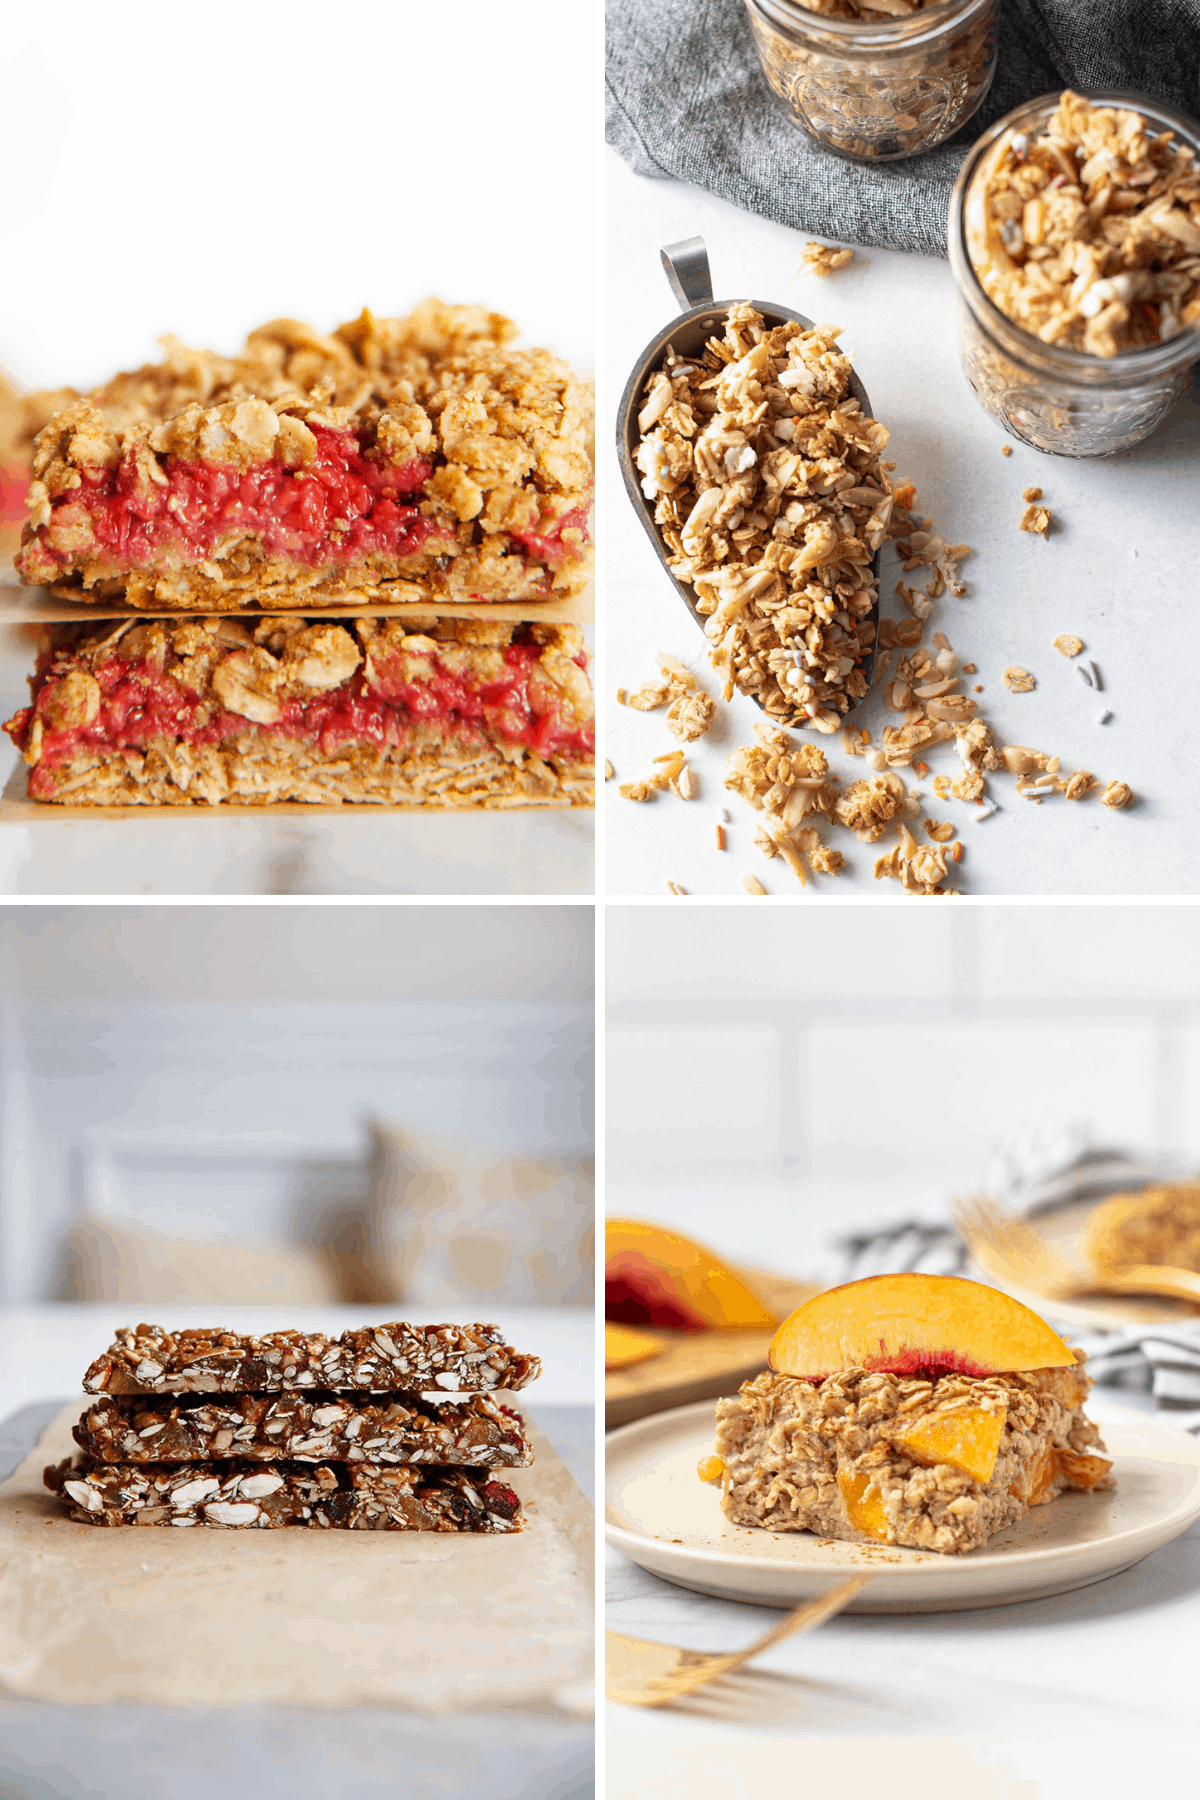 Healthy snack recipes made from oats.